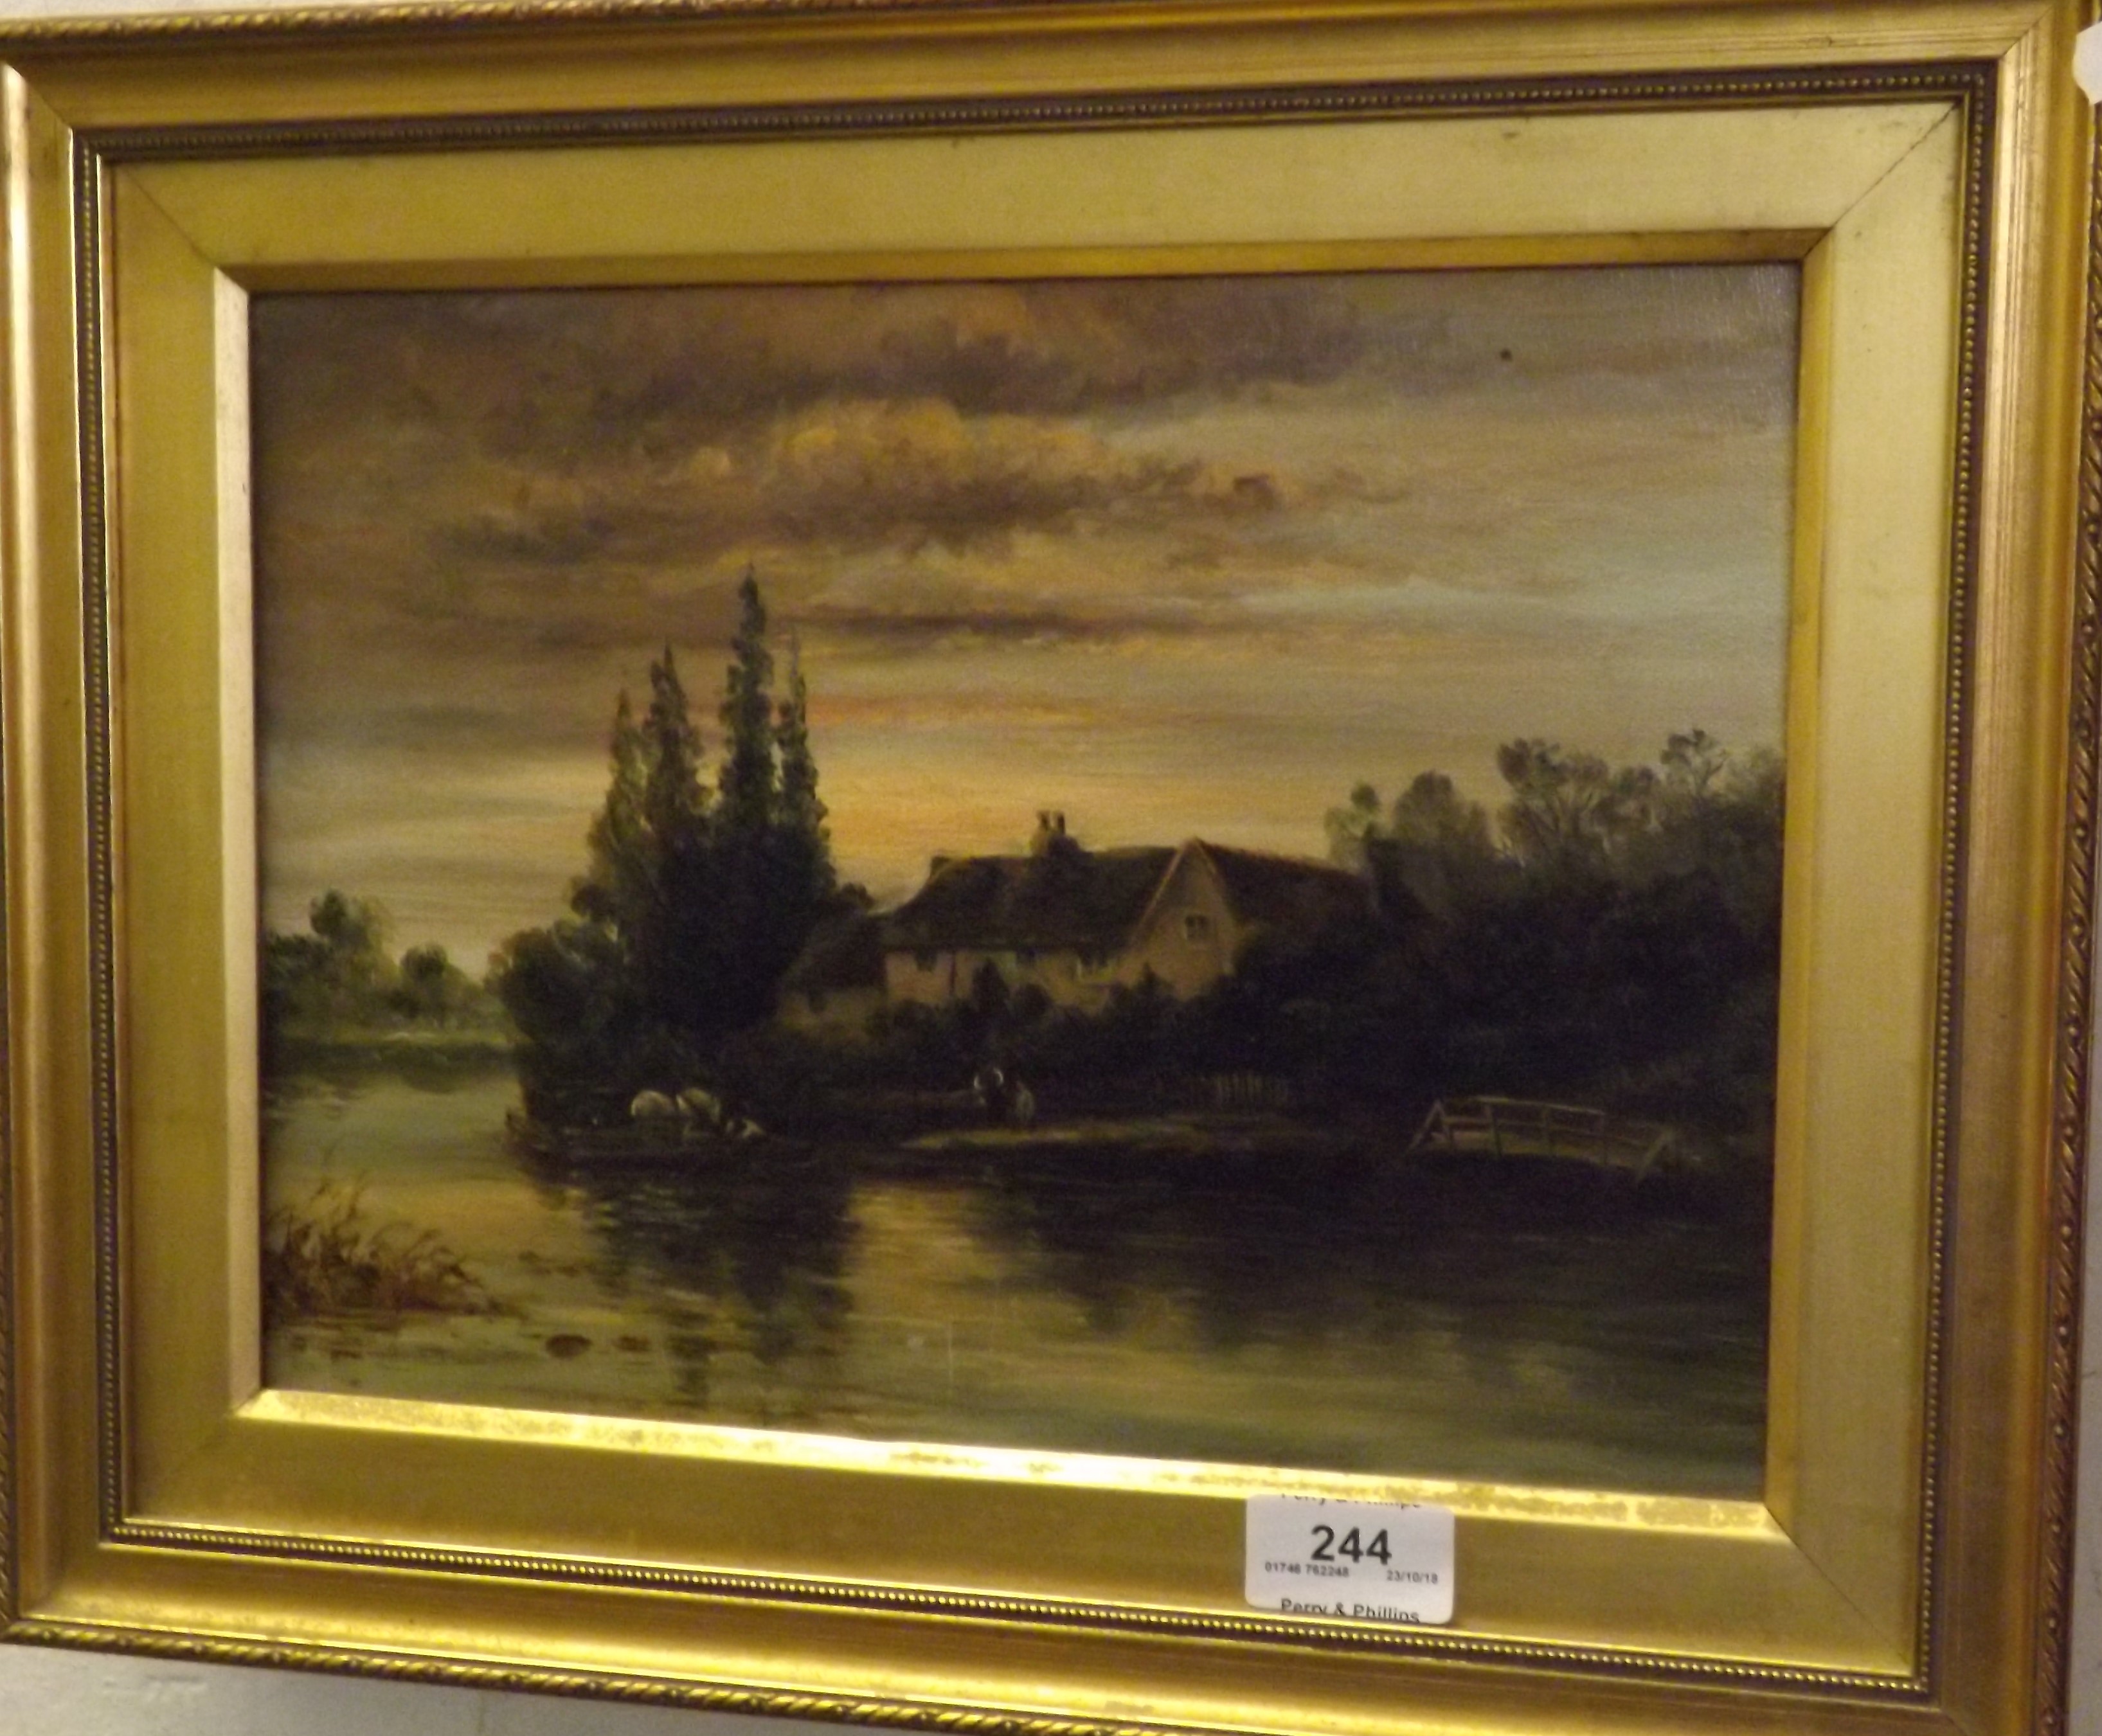 Small Oil on Canvas of a Cottage and River Scene with Boatmen in Foreground 11.5" wide 8.5" tall